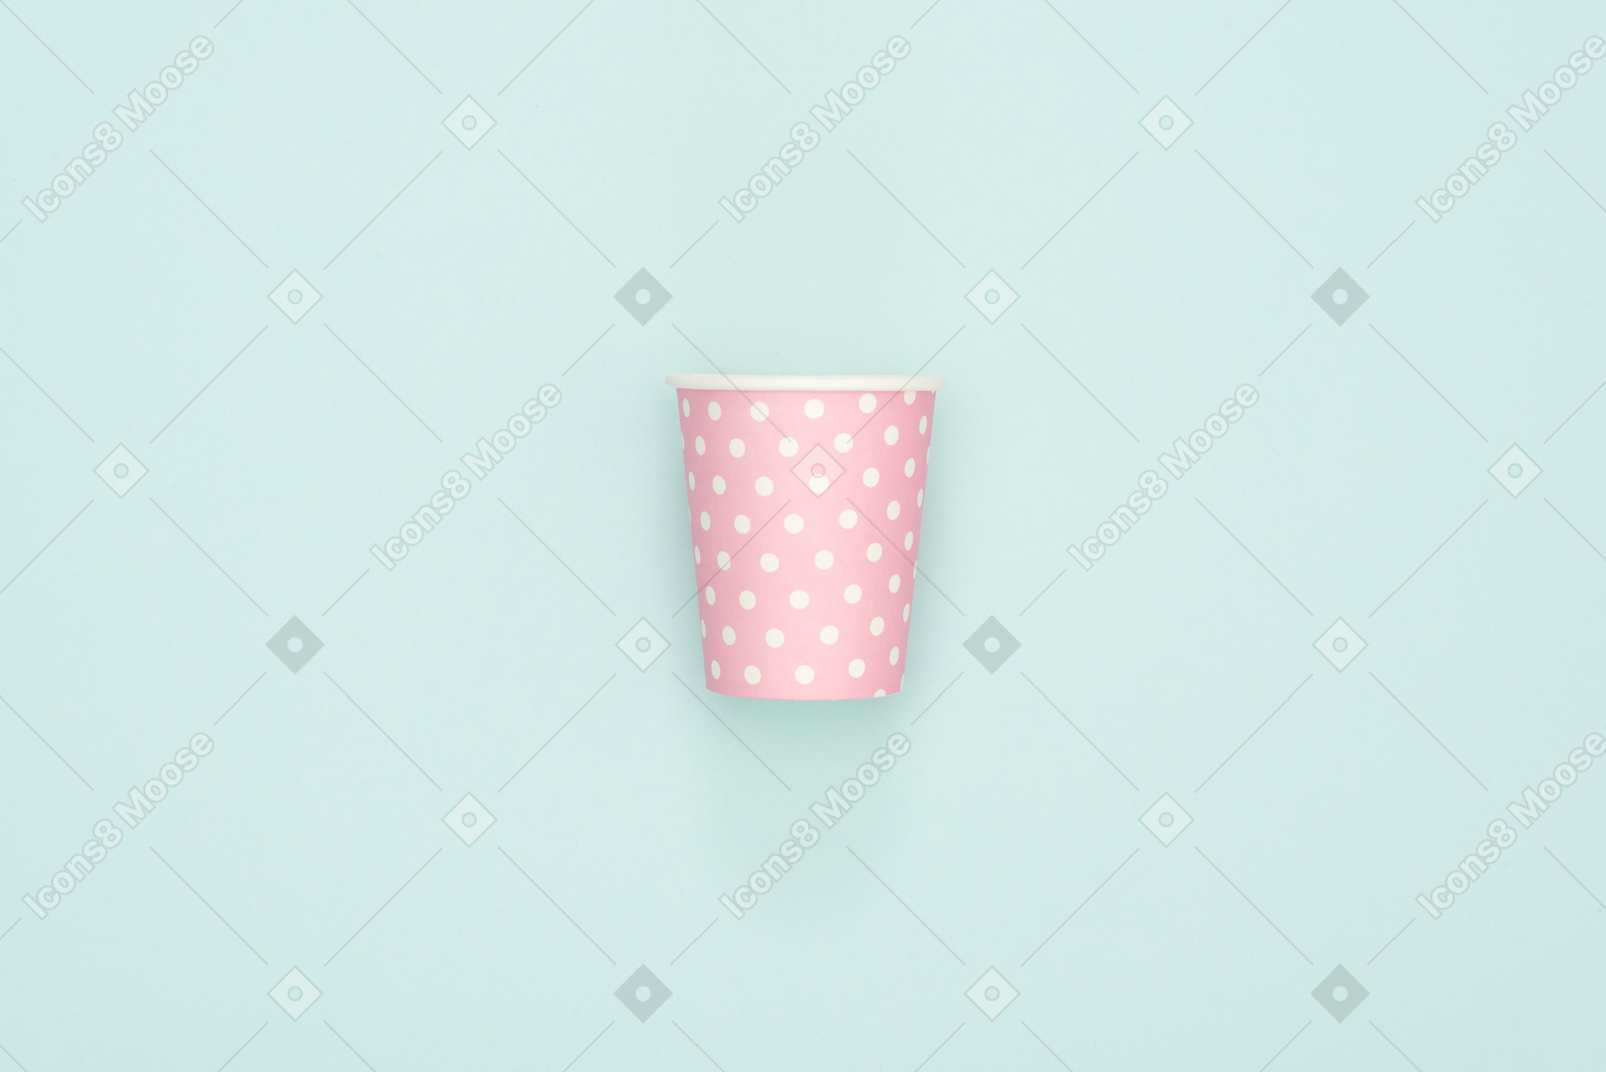 Polka dot pink paper cup